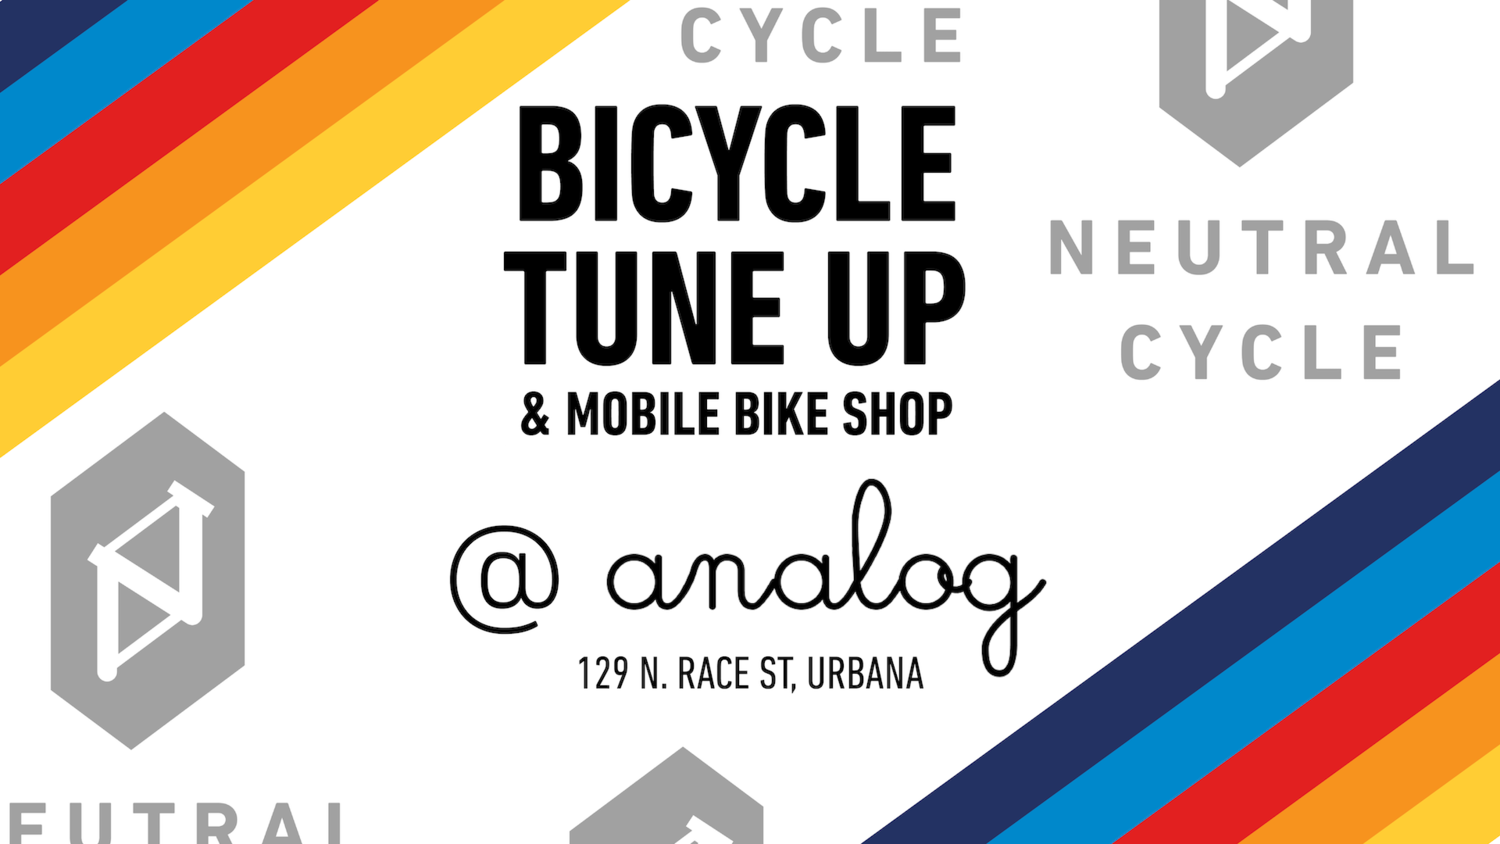 Graphic with white background and blue, red, orange, and yellow diagonal tripes in the upper left and lower right corners. The text Bicycle Tune Up & Moble Bike Shop is in centered in black, with the location and address of the bike shop. Neutral Cycleâ€™s gray logo is in the background. Image from the Neutral Cycle appointment website. 